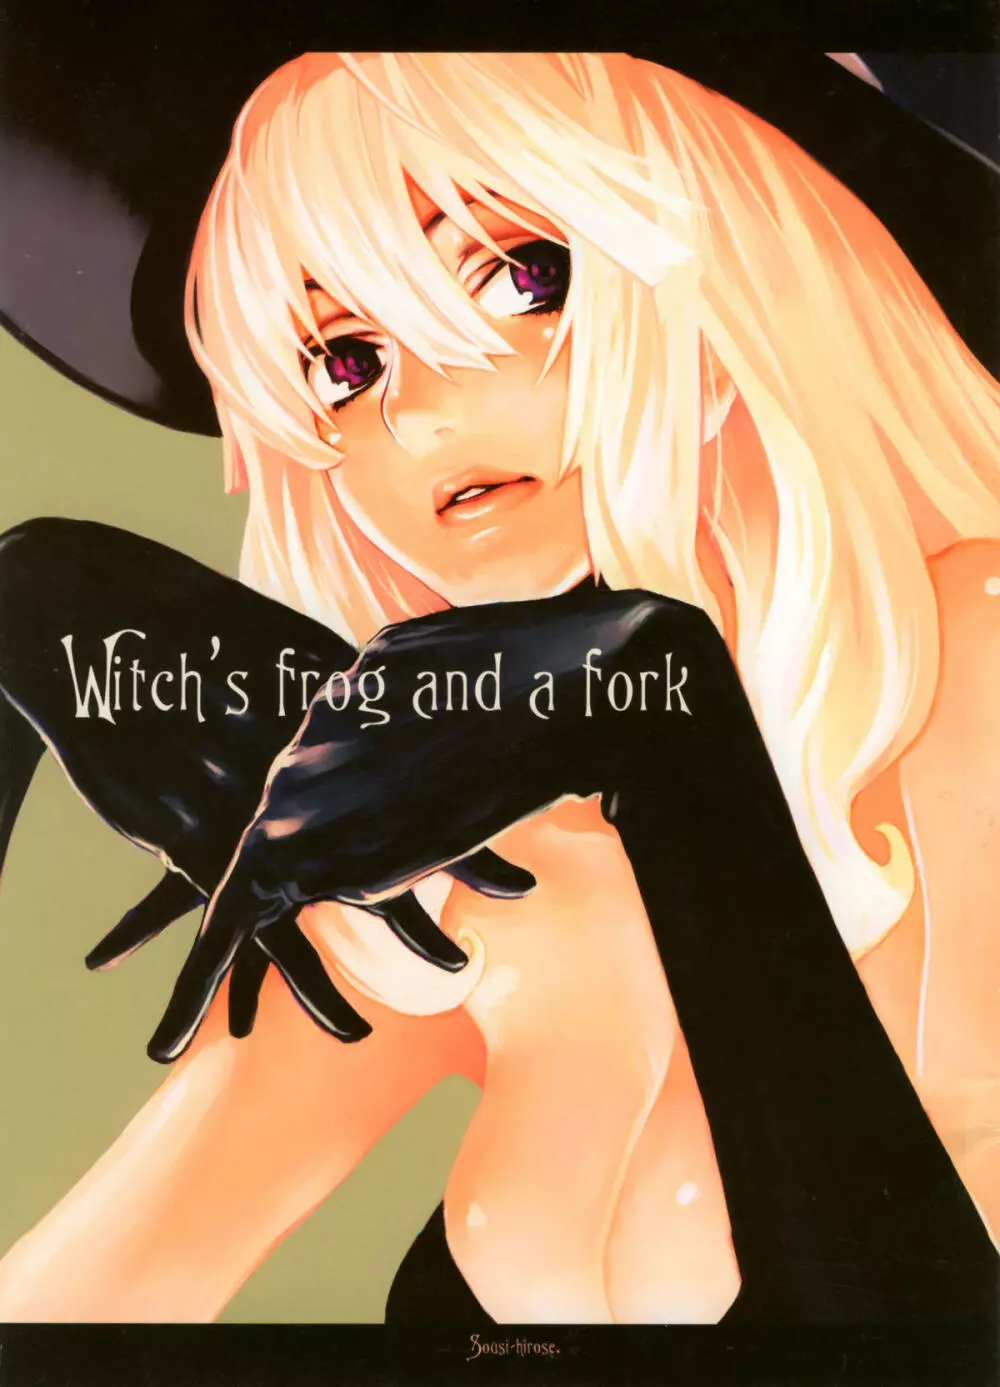 Witch’s frog and a fork